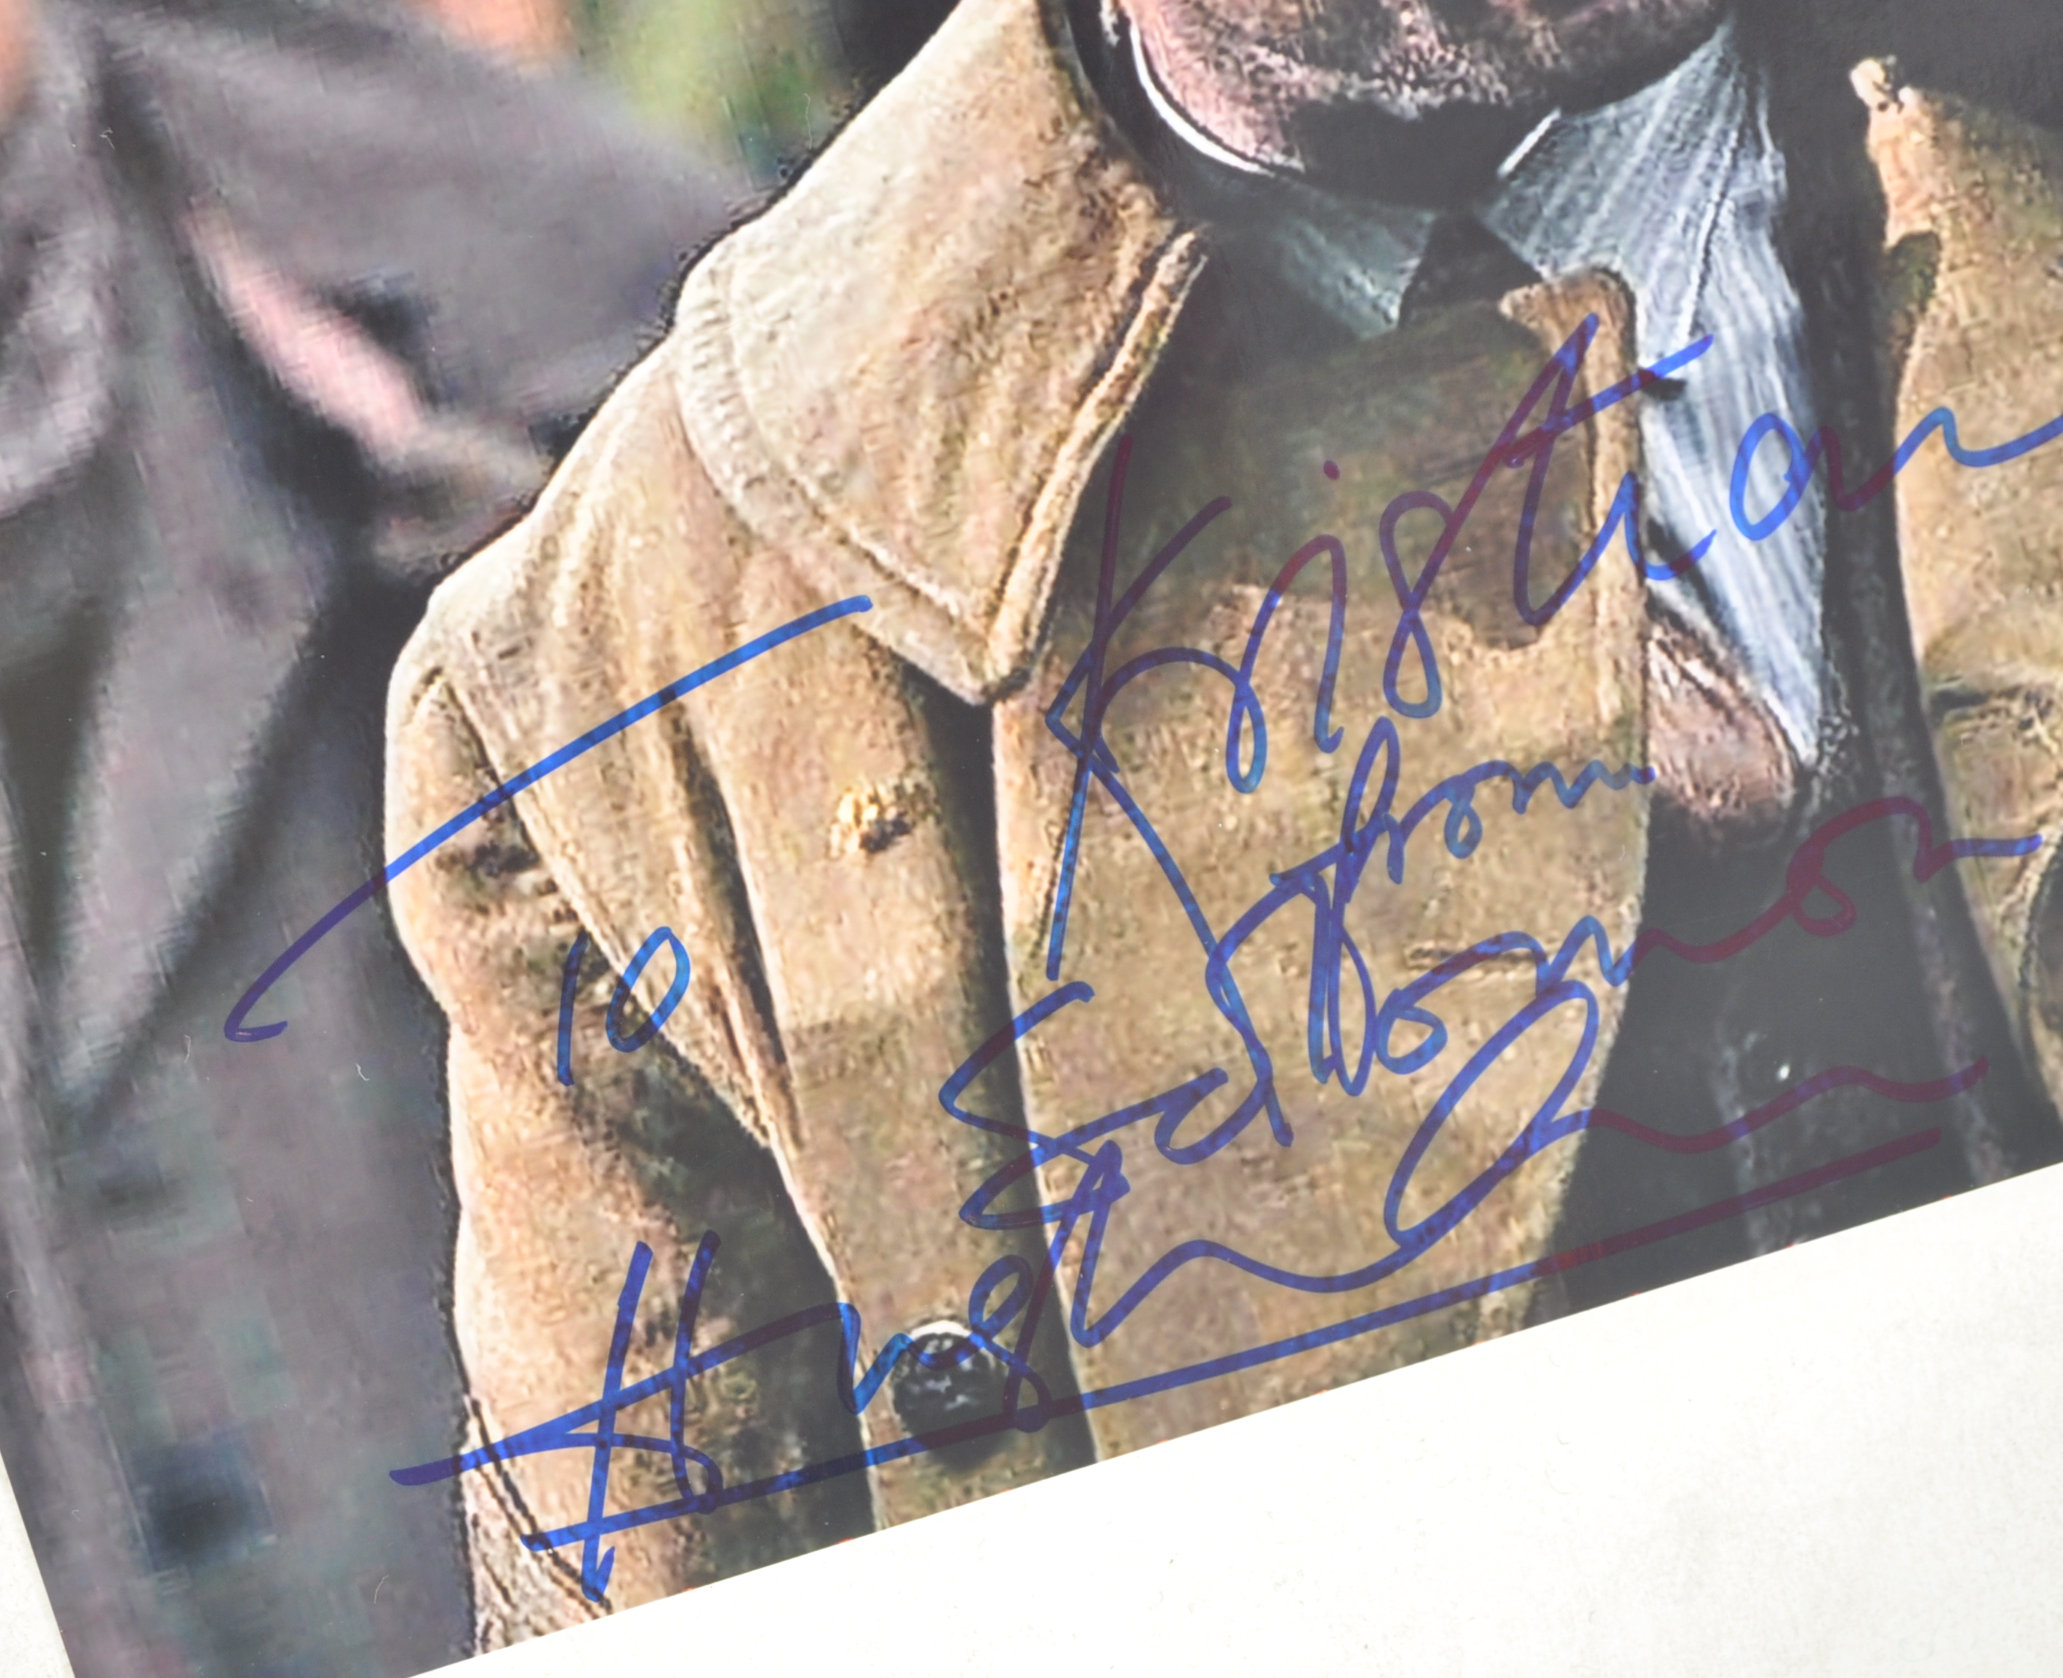 DOCTOR WHO - COLLECTION OF SIGNED 8X10" PHOTOGRAPHS - Image 4 of 6